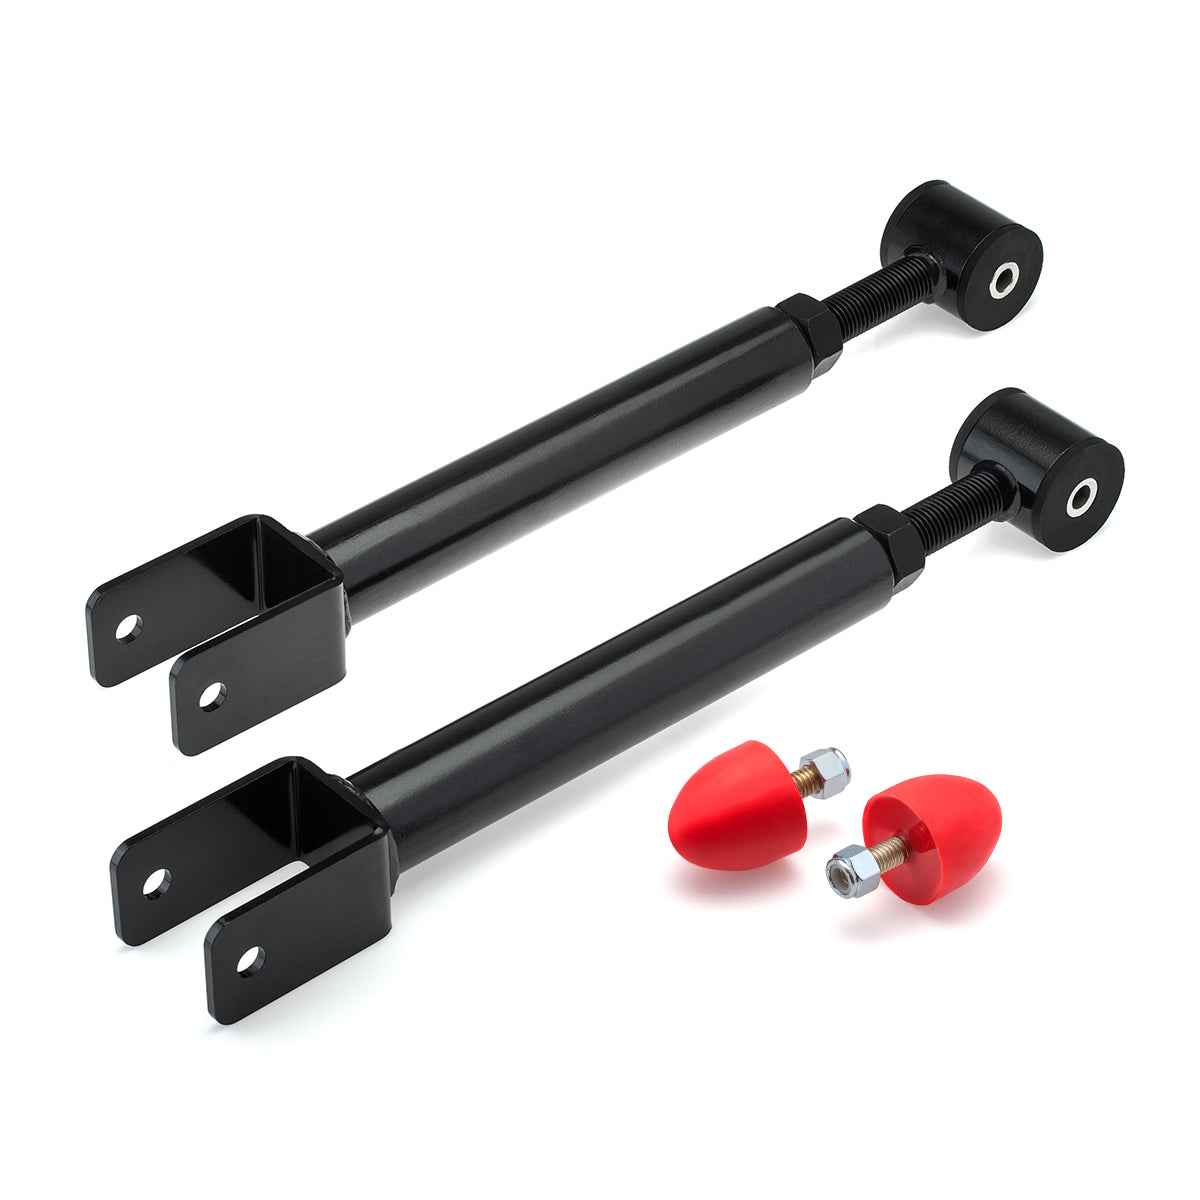 1997-2006 Jeep Wrangler TJ Adjustable Front upper Control Arms with Bump Stops for 0-8" Kits